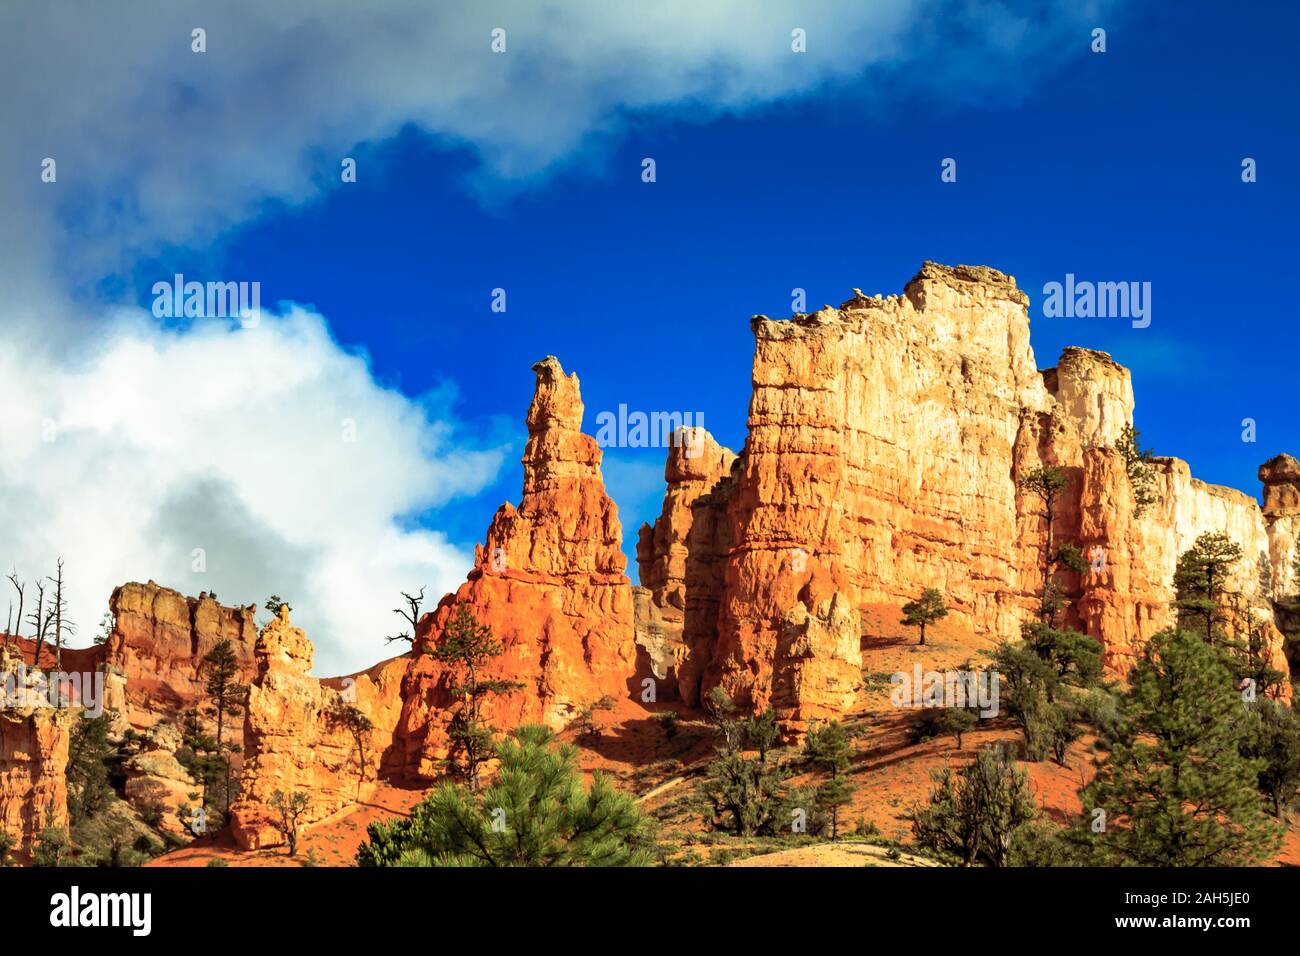 Made in USA, USA, Reisefotographie, Bryce Canyon Stock Photo